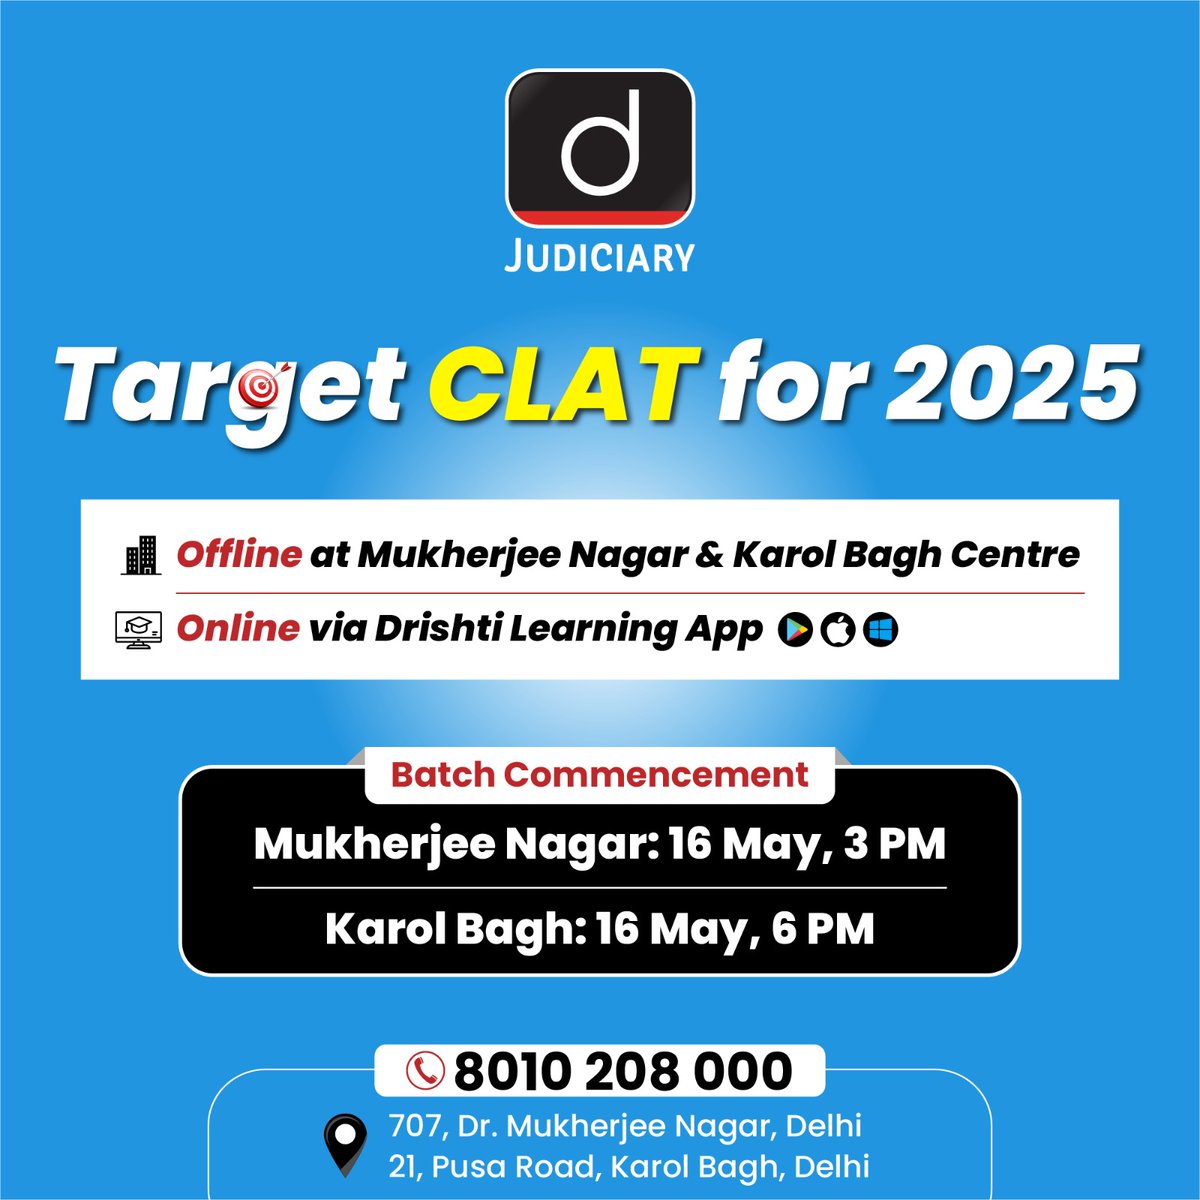 Join the path to legal excellence with our Target CLAT 2025 program! Check the link: drishti.xyz/CLAT2025 #CLAT #JudicialServices #NewBatch #Law #Learning #LawStudents #India #IndianJudiciary #LegalStudies #Constitution #Aspirants #TeamDrishti #DrishtiJudiciary